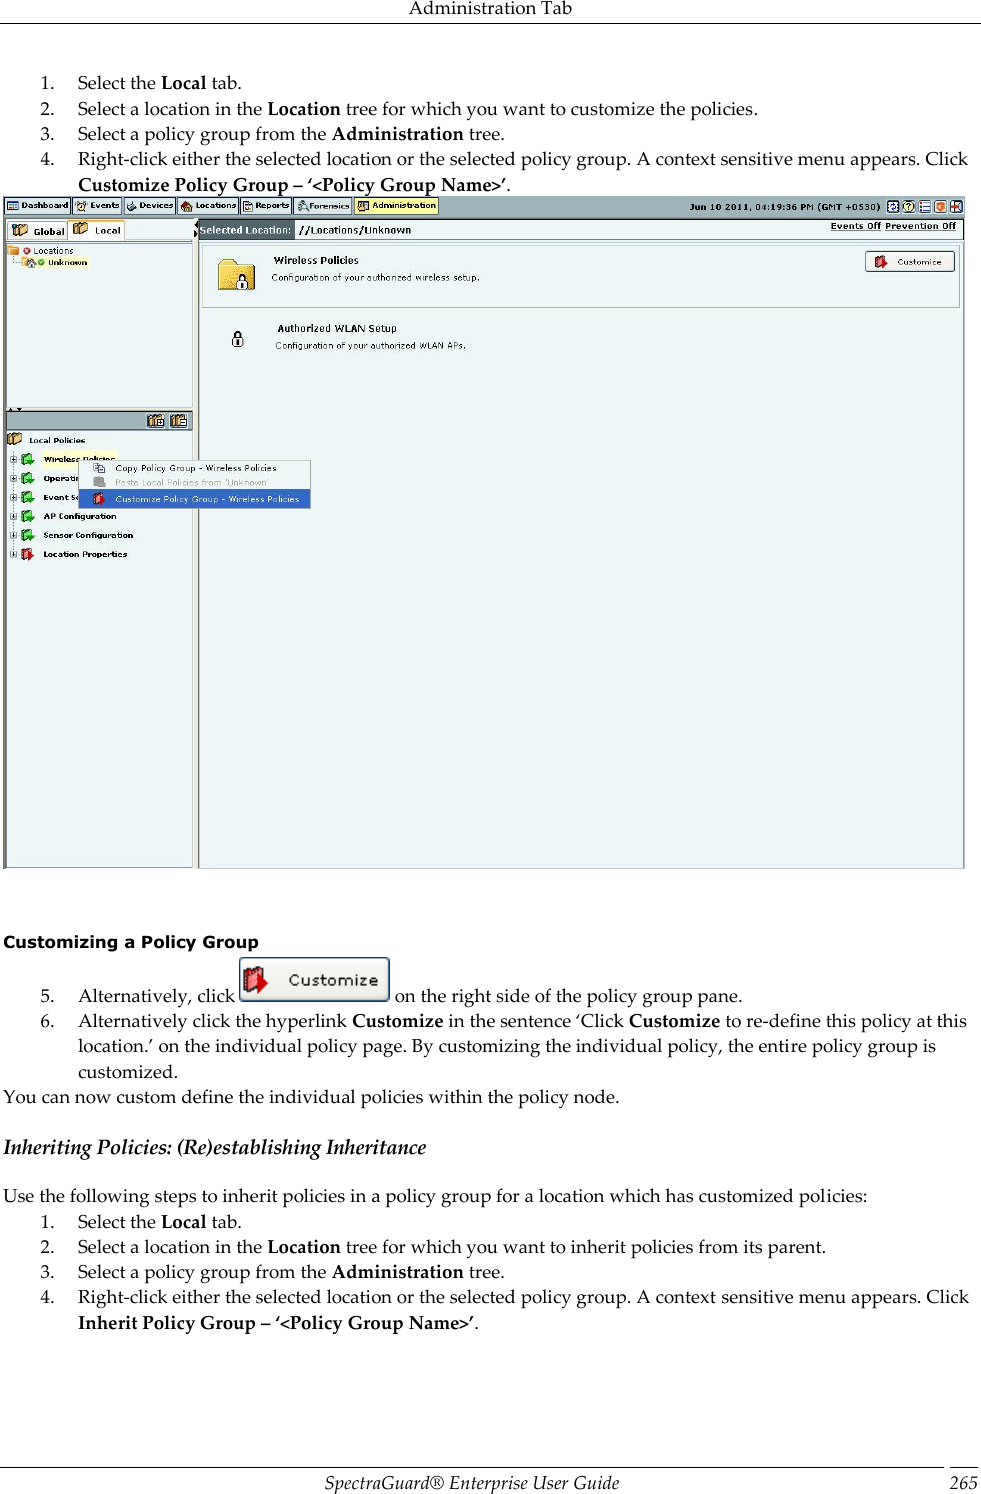 Administration Tab SpectraGuard®  Enterprise User Guide 265 1. Select the Local tab. 2. Select a location in the Location tree for which you want to customize the policies. 3. Select a policy group from the Administration tree. 4. Right-click either the selected location or the selected policy group. A context sensitive menu appears. Click Customize Policy Group – ‘&lt;Policy Group Name&gt;’.       Customizing a Policy Group 5. Alternatively, click   on the right side of the policy group pane. 6. Alternatively click the hyperlink Customize in the sentence ‘Click Customize to re-define this policy at this location.’ on the individual policy page. By customizing the individual policy, the entire policy group is customized. You can now custom define the individual policies within the policy node. Inheriting Policies: (Re)establishing Inheritance Use the following steps to inherit policies in a policy group for a location which has customized policies: 1. Select the Local tab. 2. Select a location in the Location tree for which you want to inherit policies from its parent. 3. Select a policy group from the Administration tree. 4. Right-click either the selected location or the selected policy group. A context sensitive menu appears. Click Inherit Policy Group – ‘&lt;Policy Group Name&gt;’. 